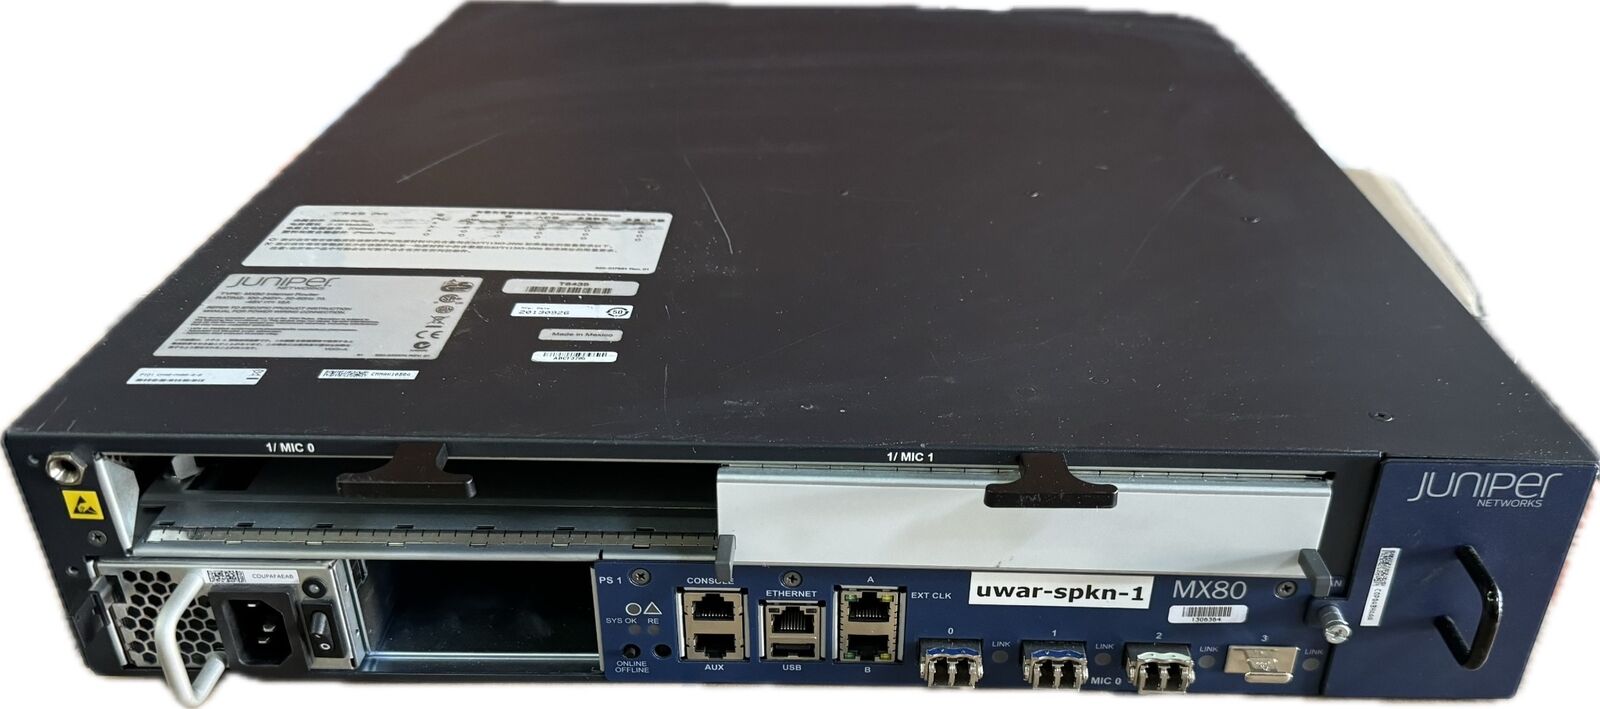 Juniper MX80 Internet Router Chassis Chas-MX80-S-B w 1x AC power supply